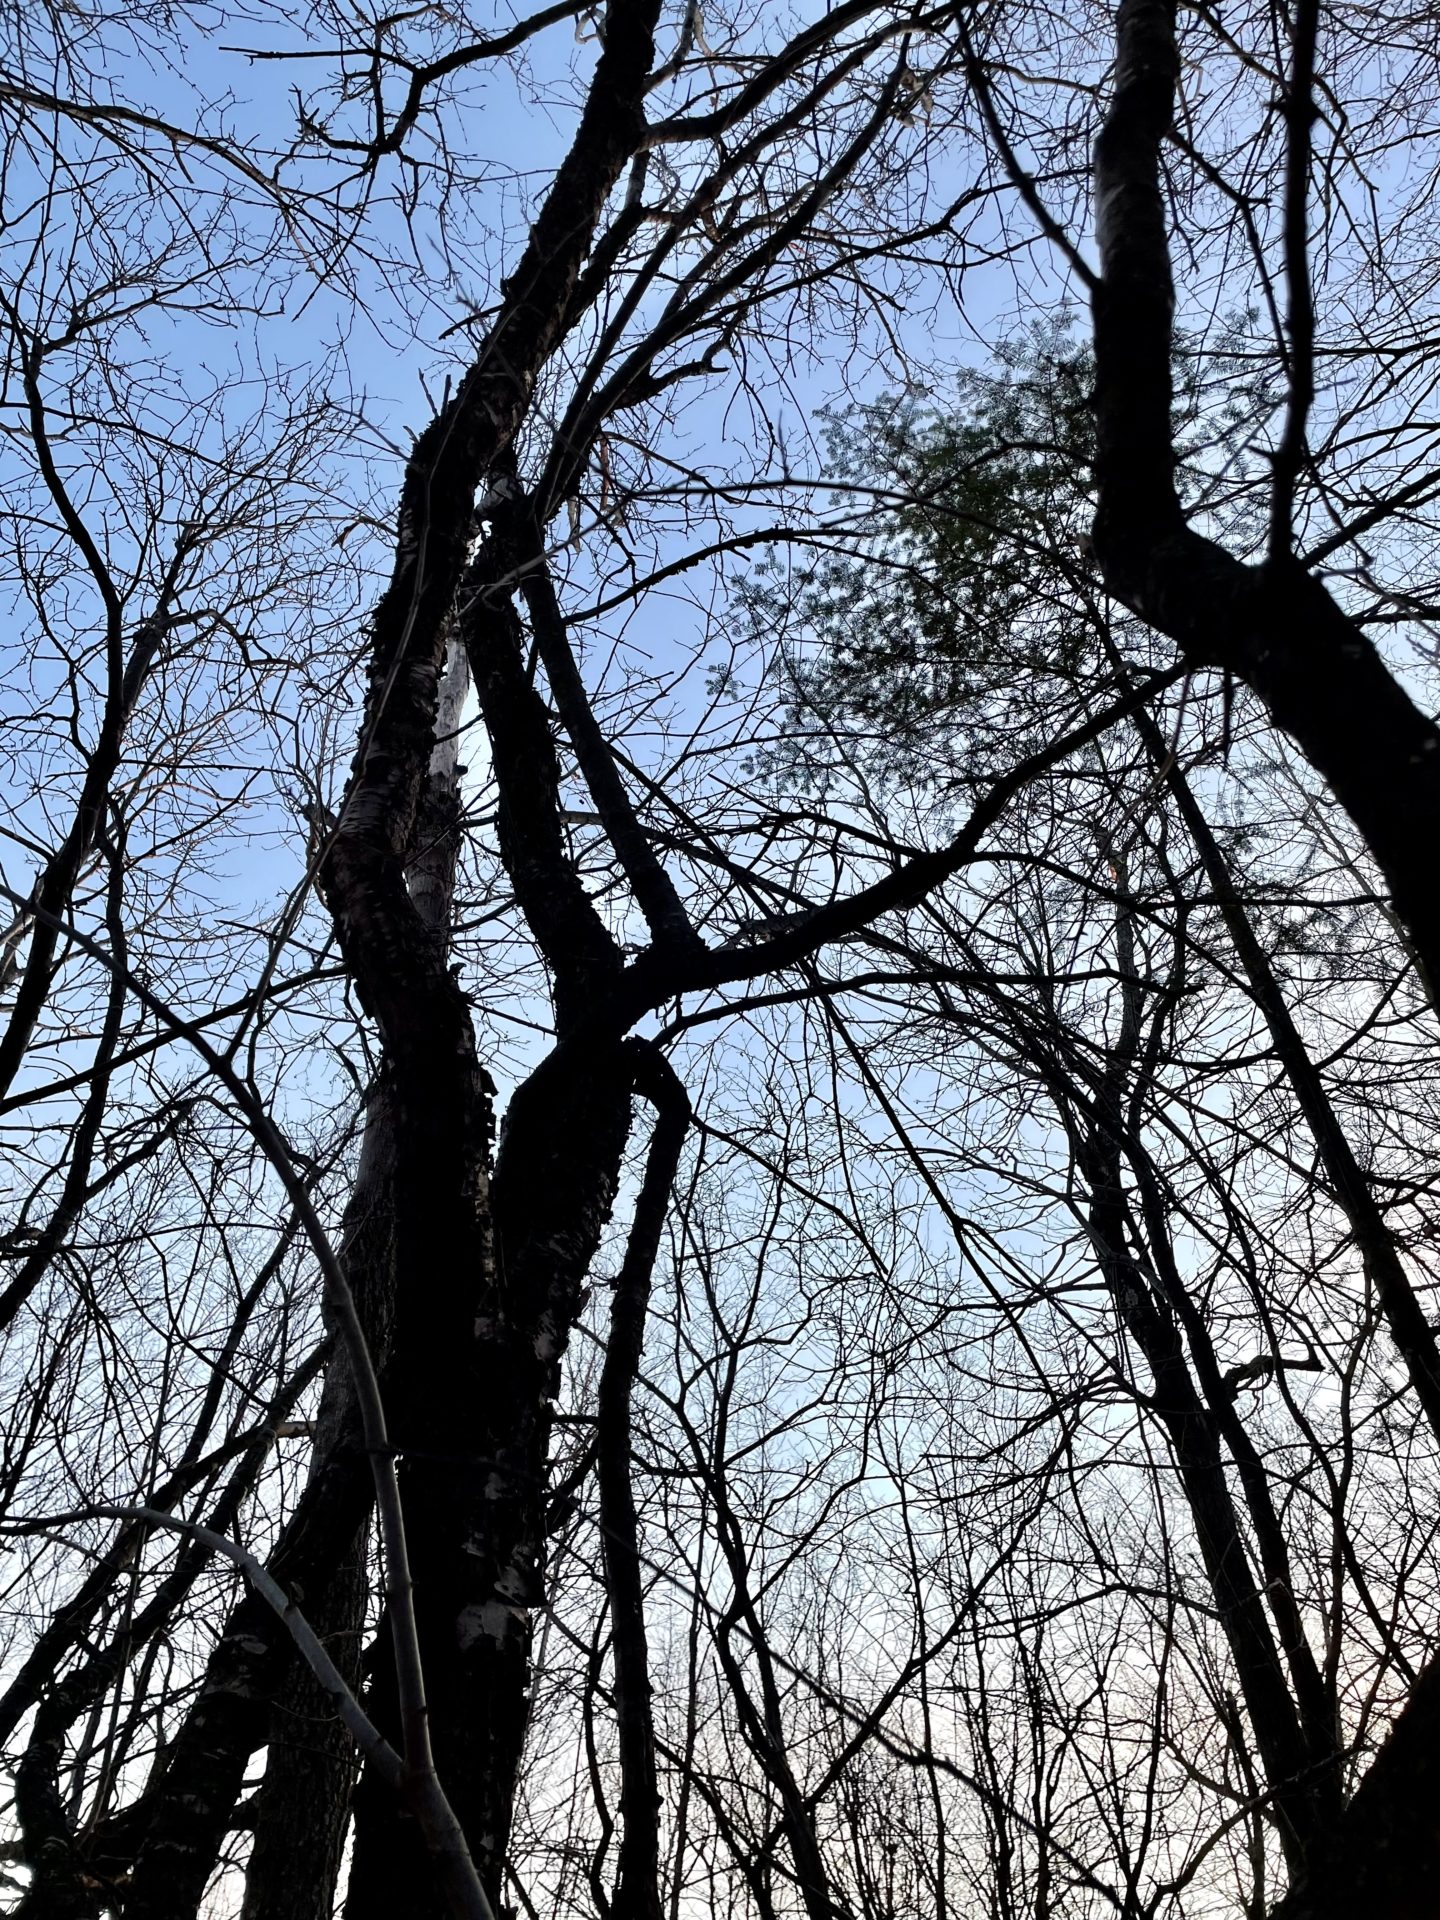 Buckthorn trees intertwined